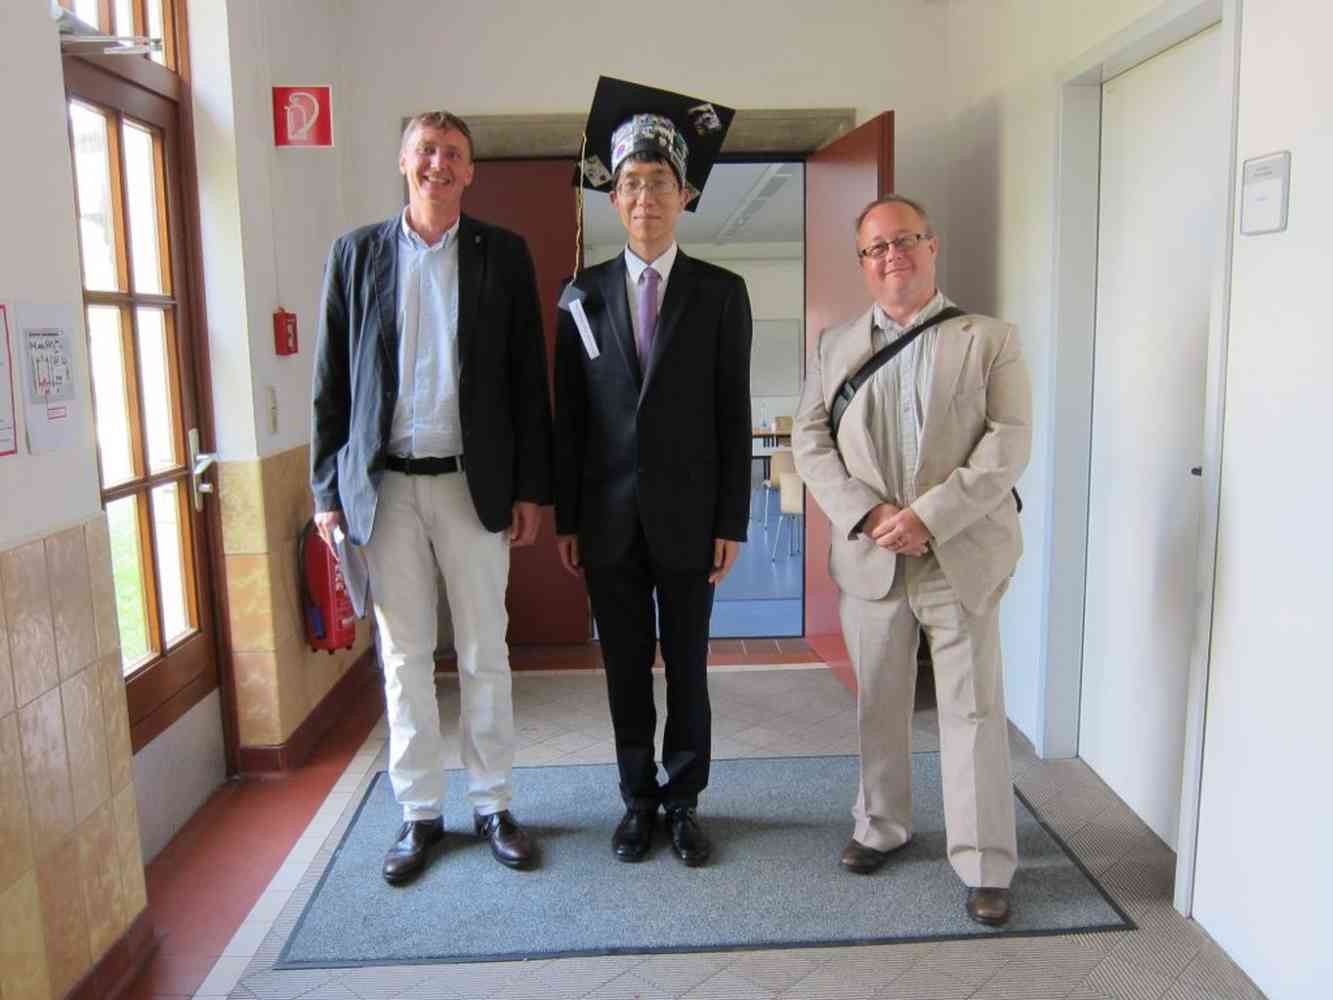 PhD Viva as External Examiner - Jacobs University, Bremen, Germany - Dr. Seung-Hun Lee with Prof. Dr. Nikolai Kuhnert and Dr. Adam Le Gresley